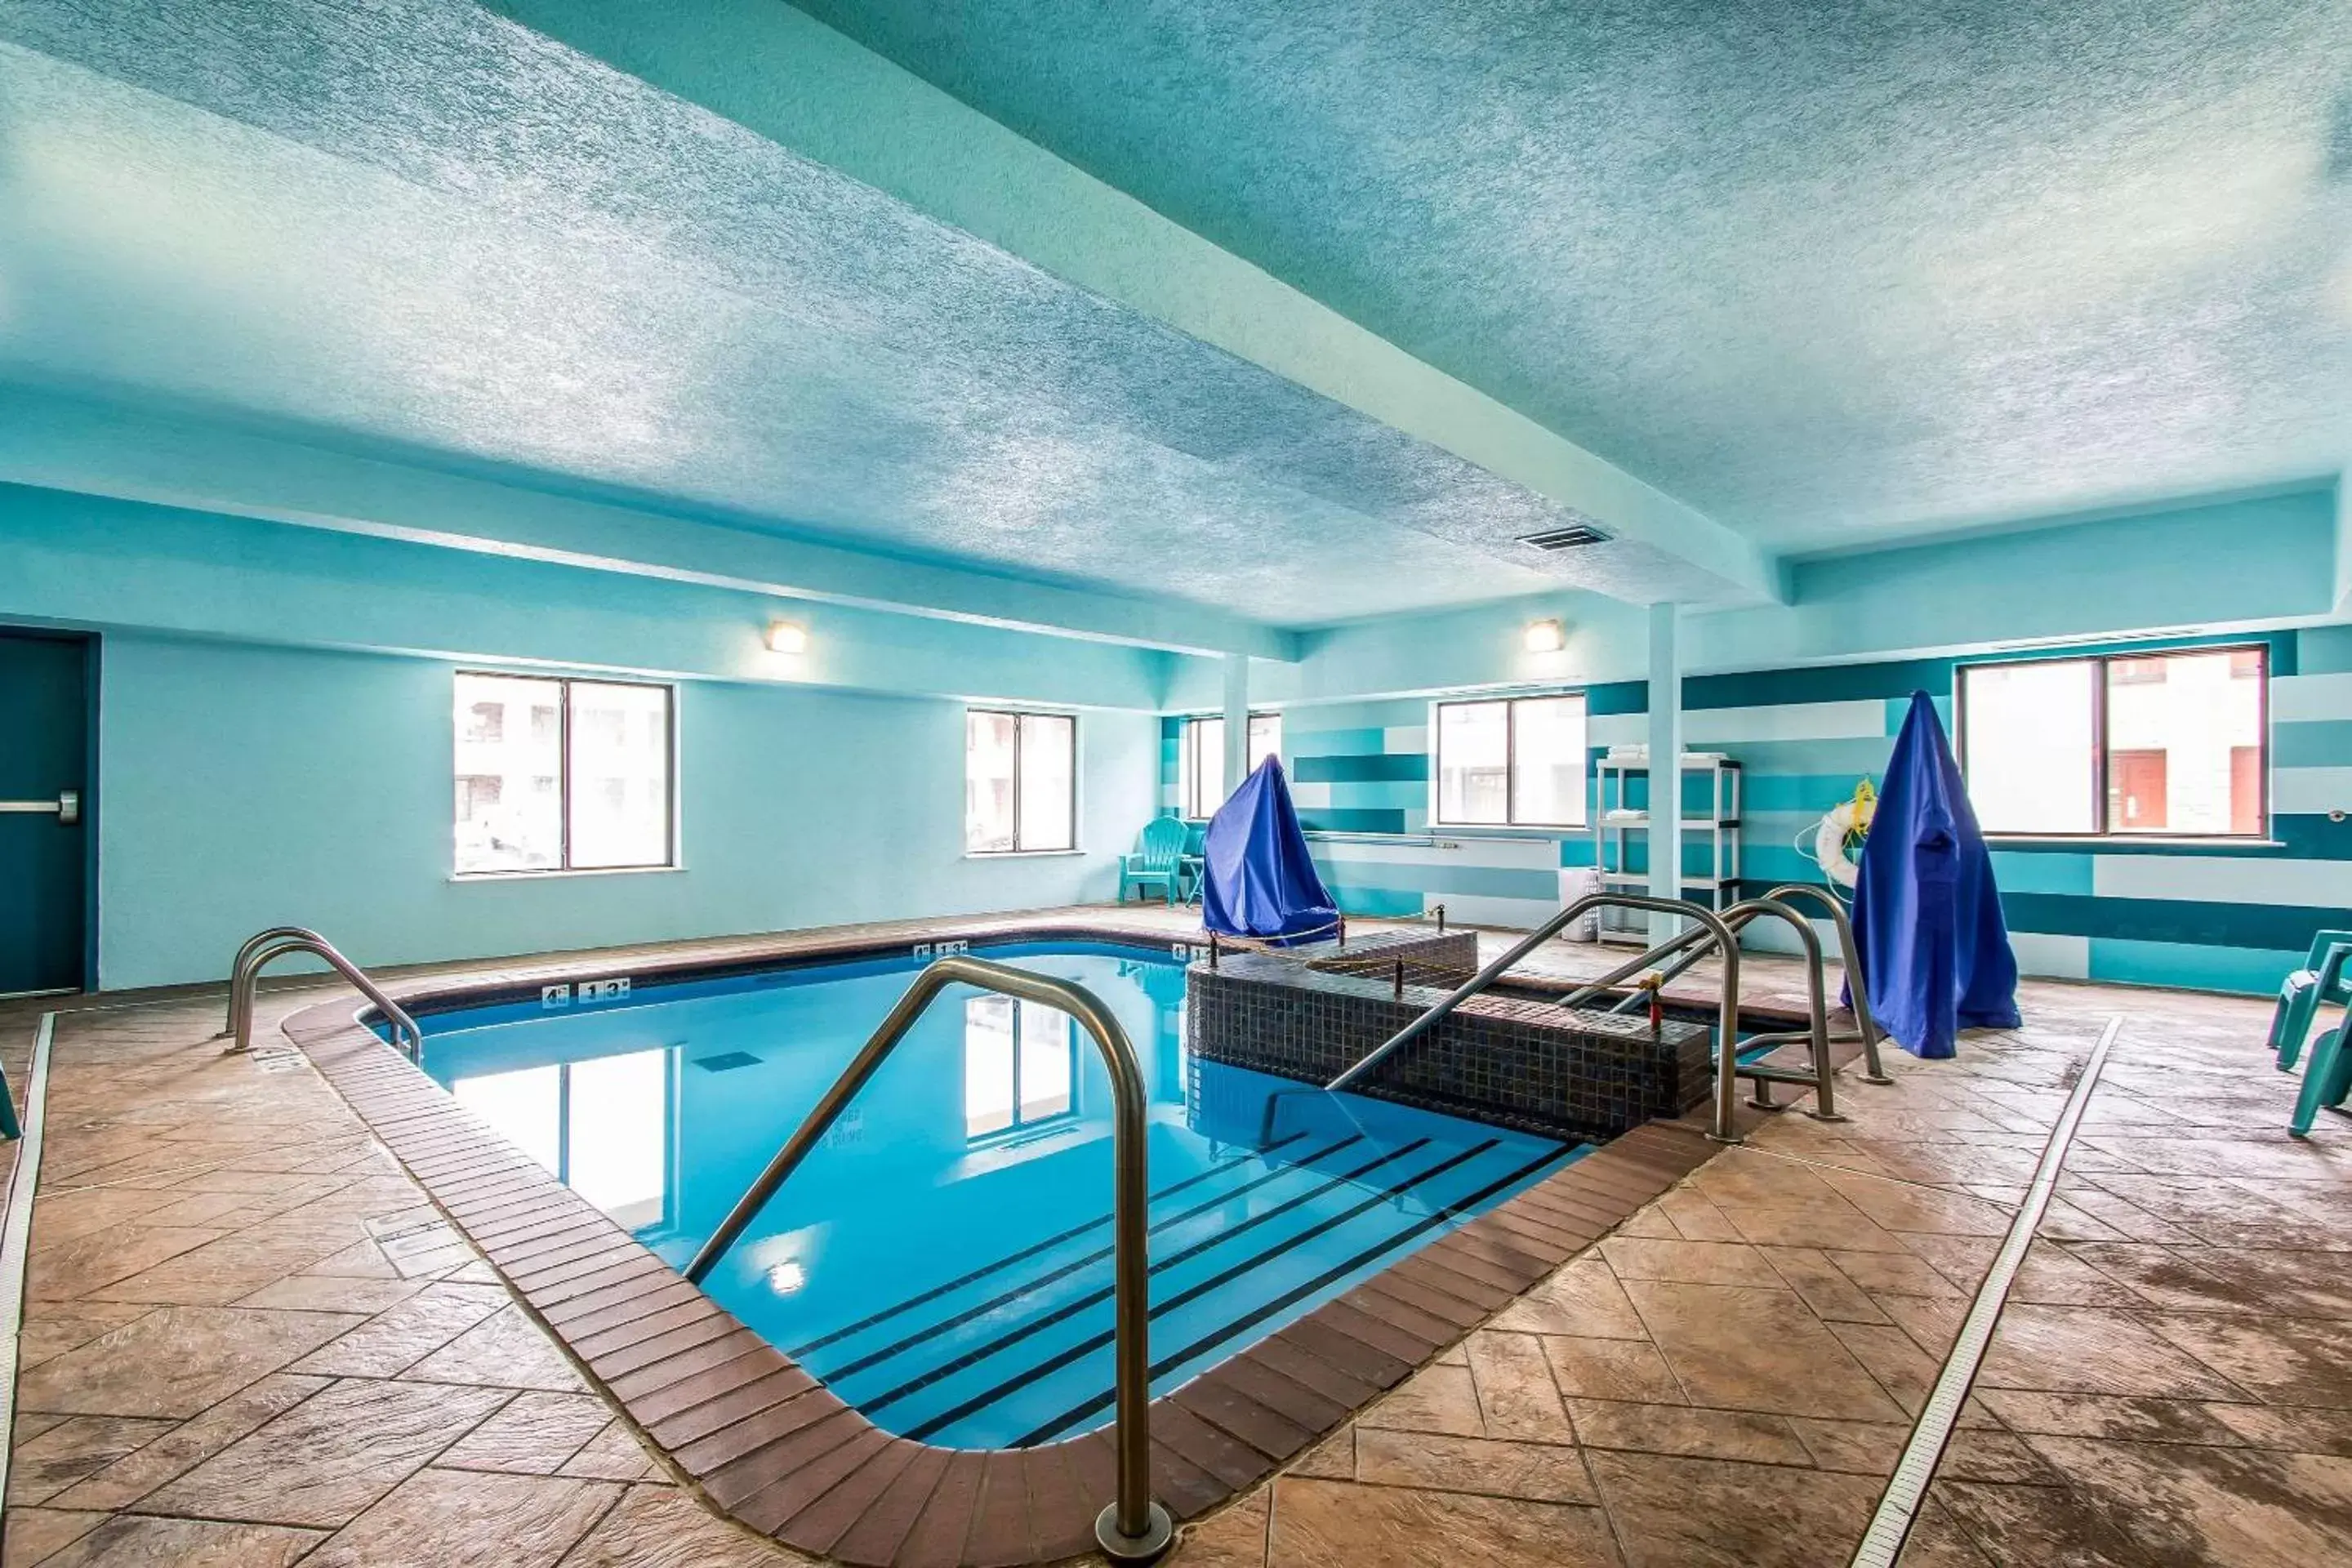 On site, Swimming Pool in Comfort Suites Fairgrounds West